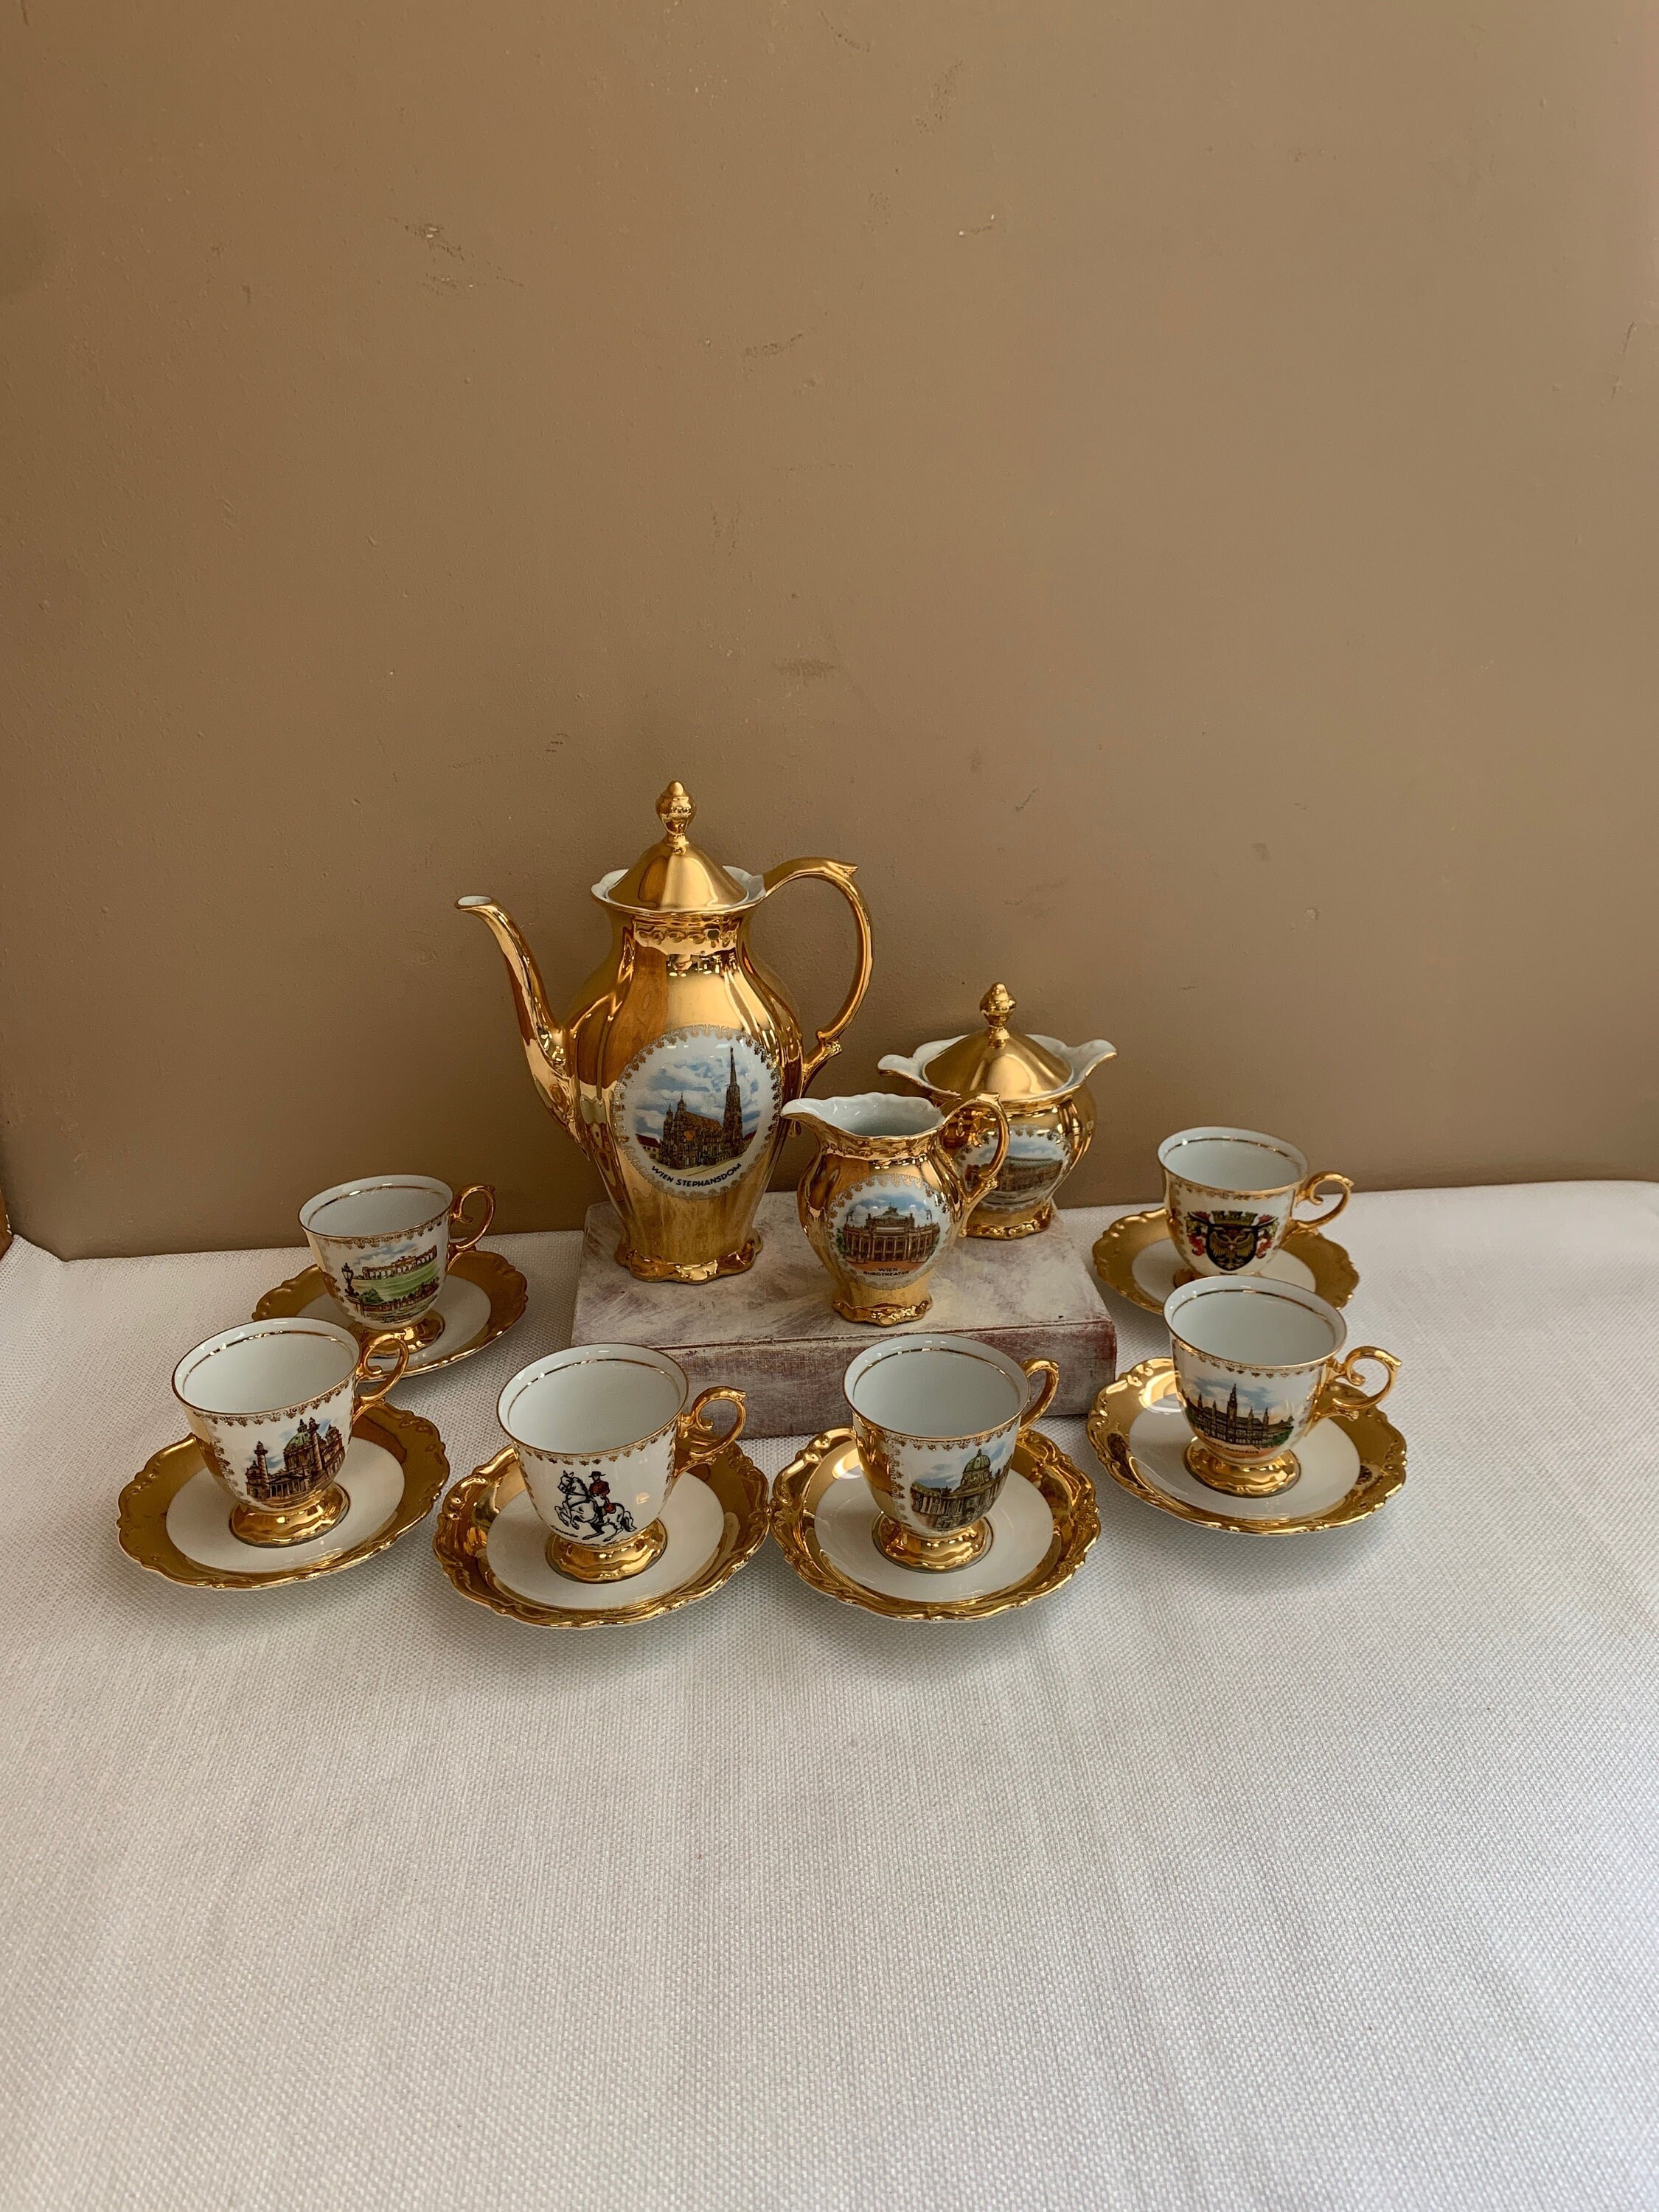 Bavarian Ceramic Coffee or Tea Vintage Vienna Cups - Etsy With Porcelain Wien Demitasse Saucers, for Set Pictures 6, Six With and Gold